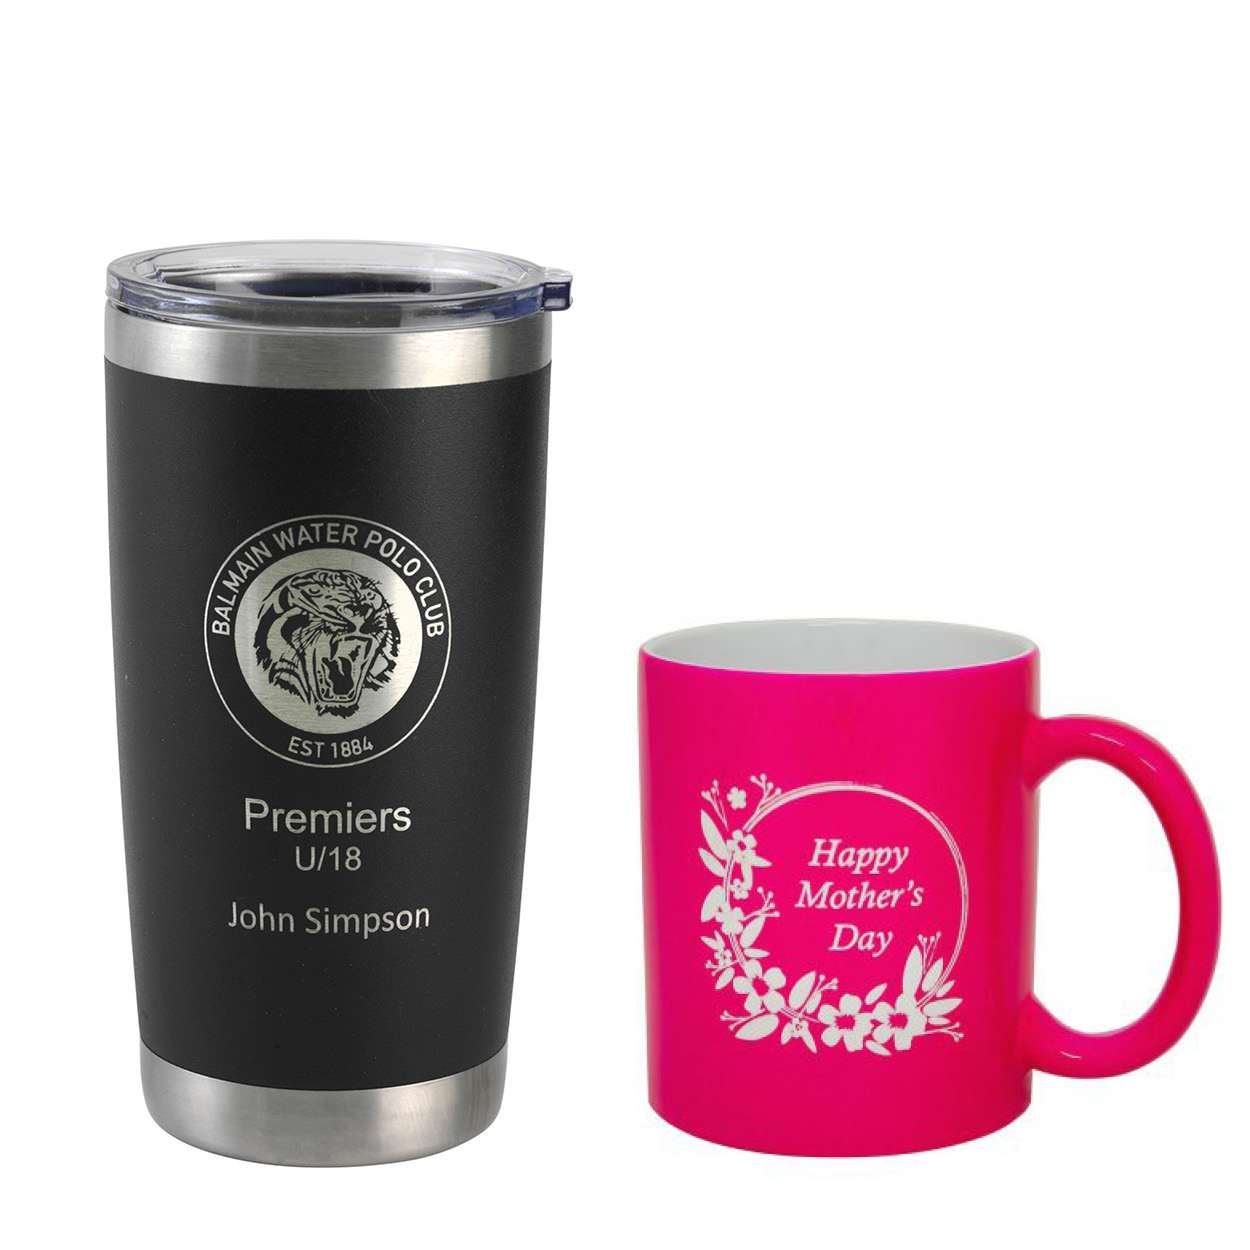 Engraving cups and mugs